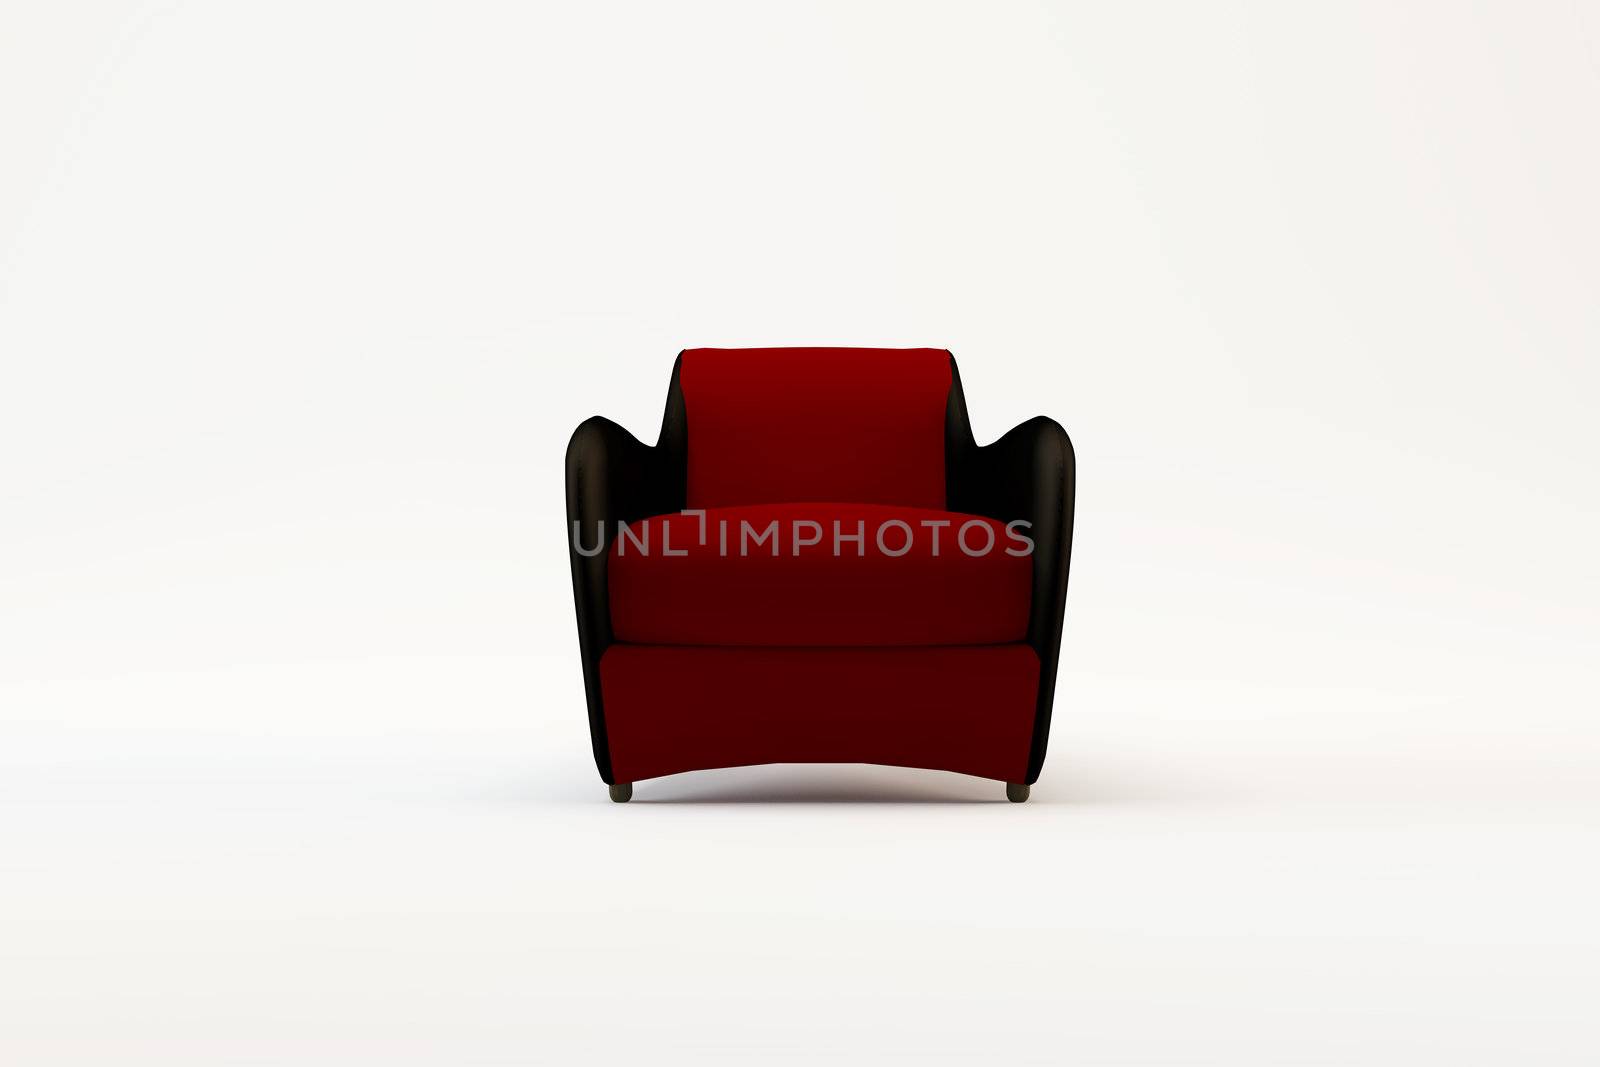 A red and black armchair